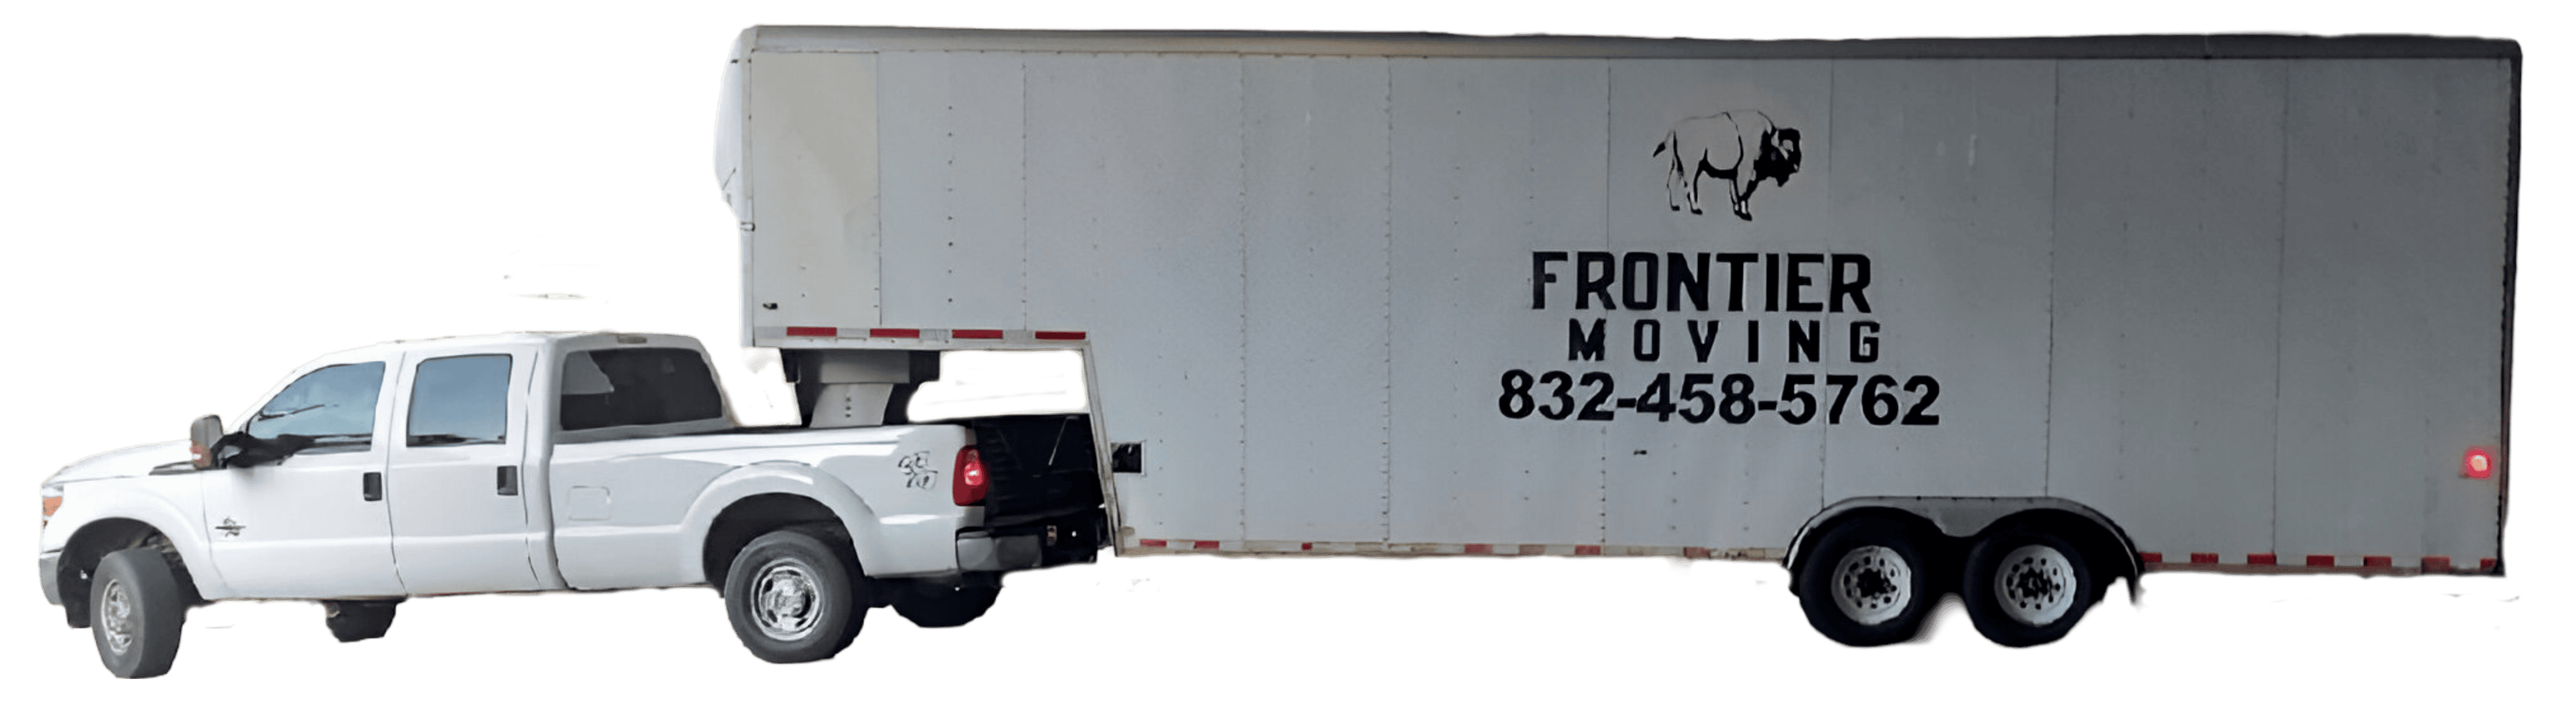 Frontier Moving - Tomball Moving Company